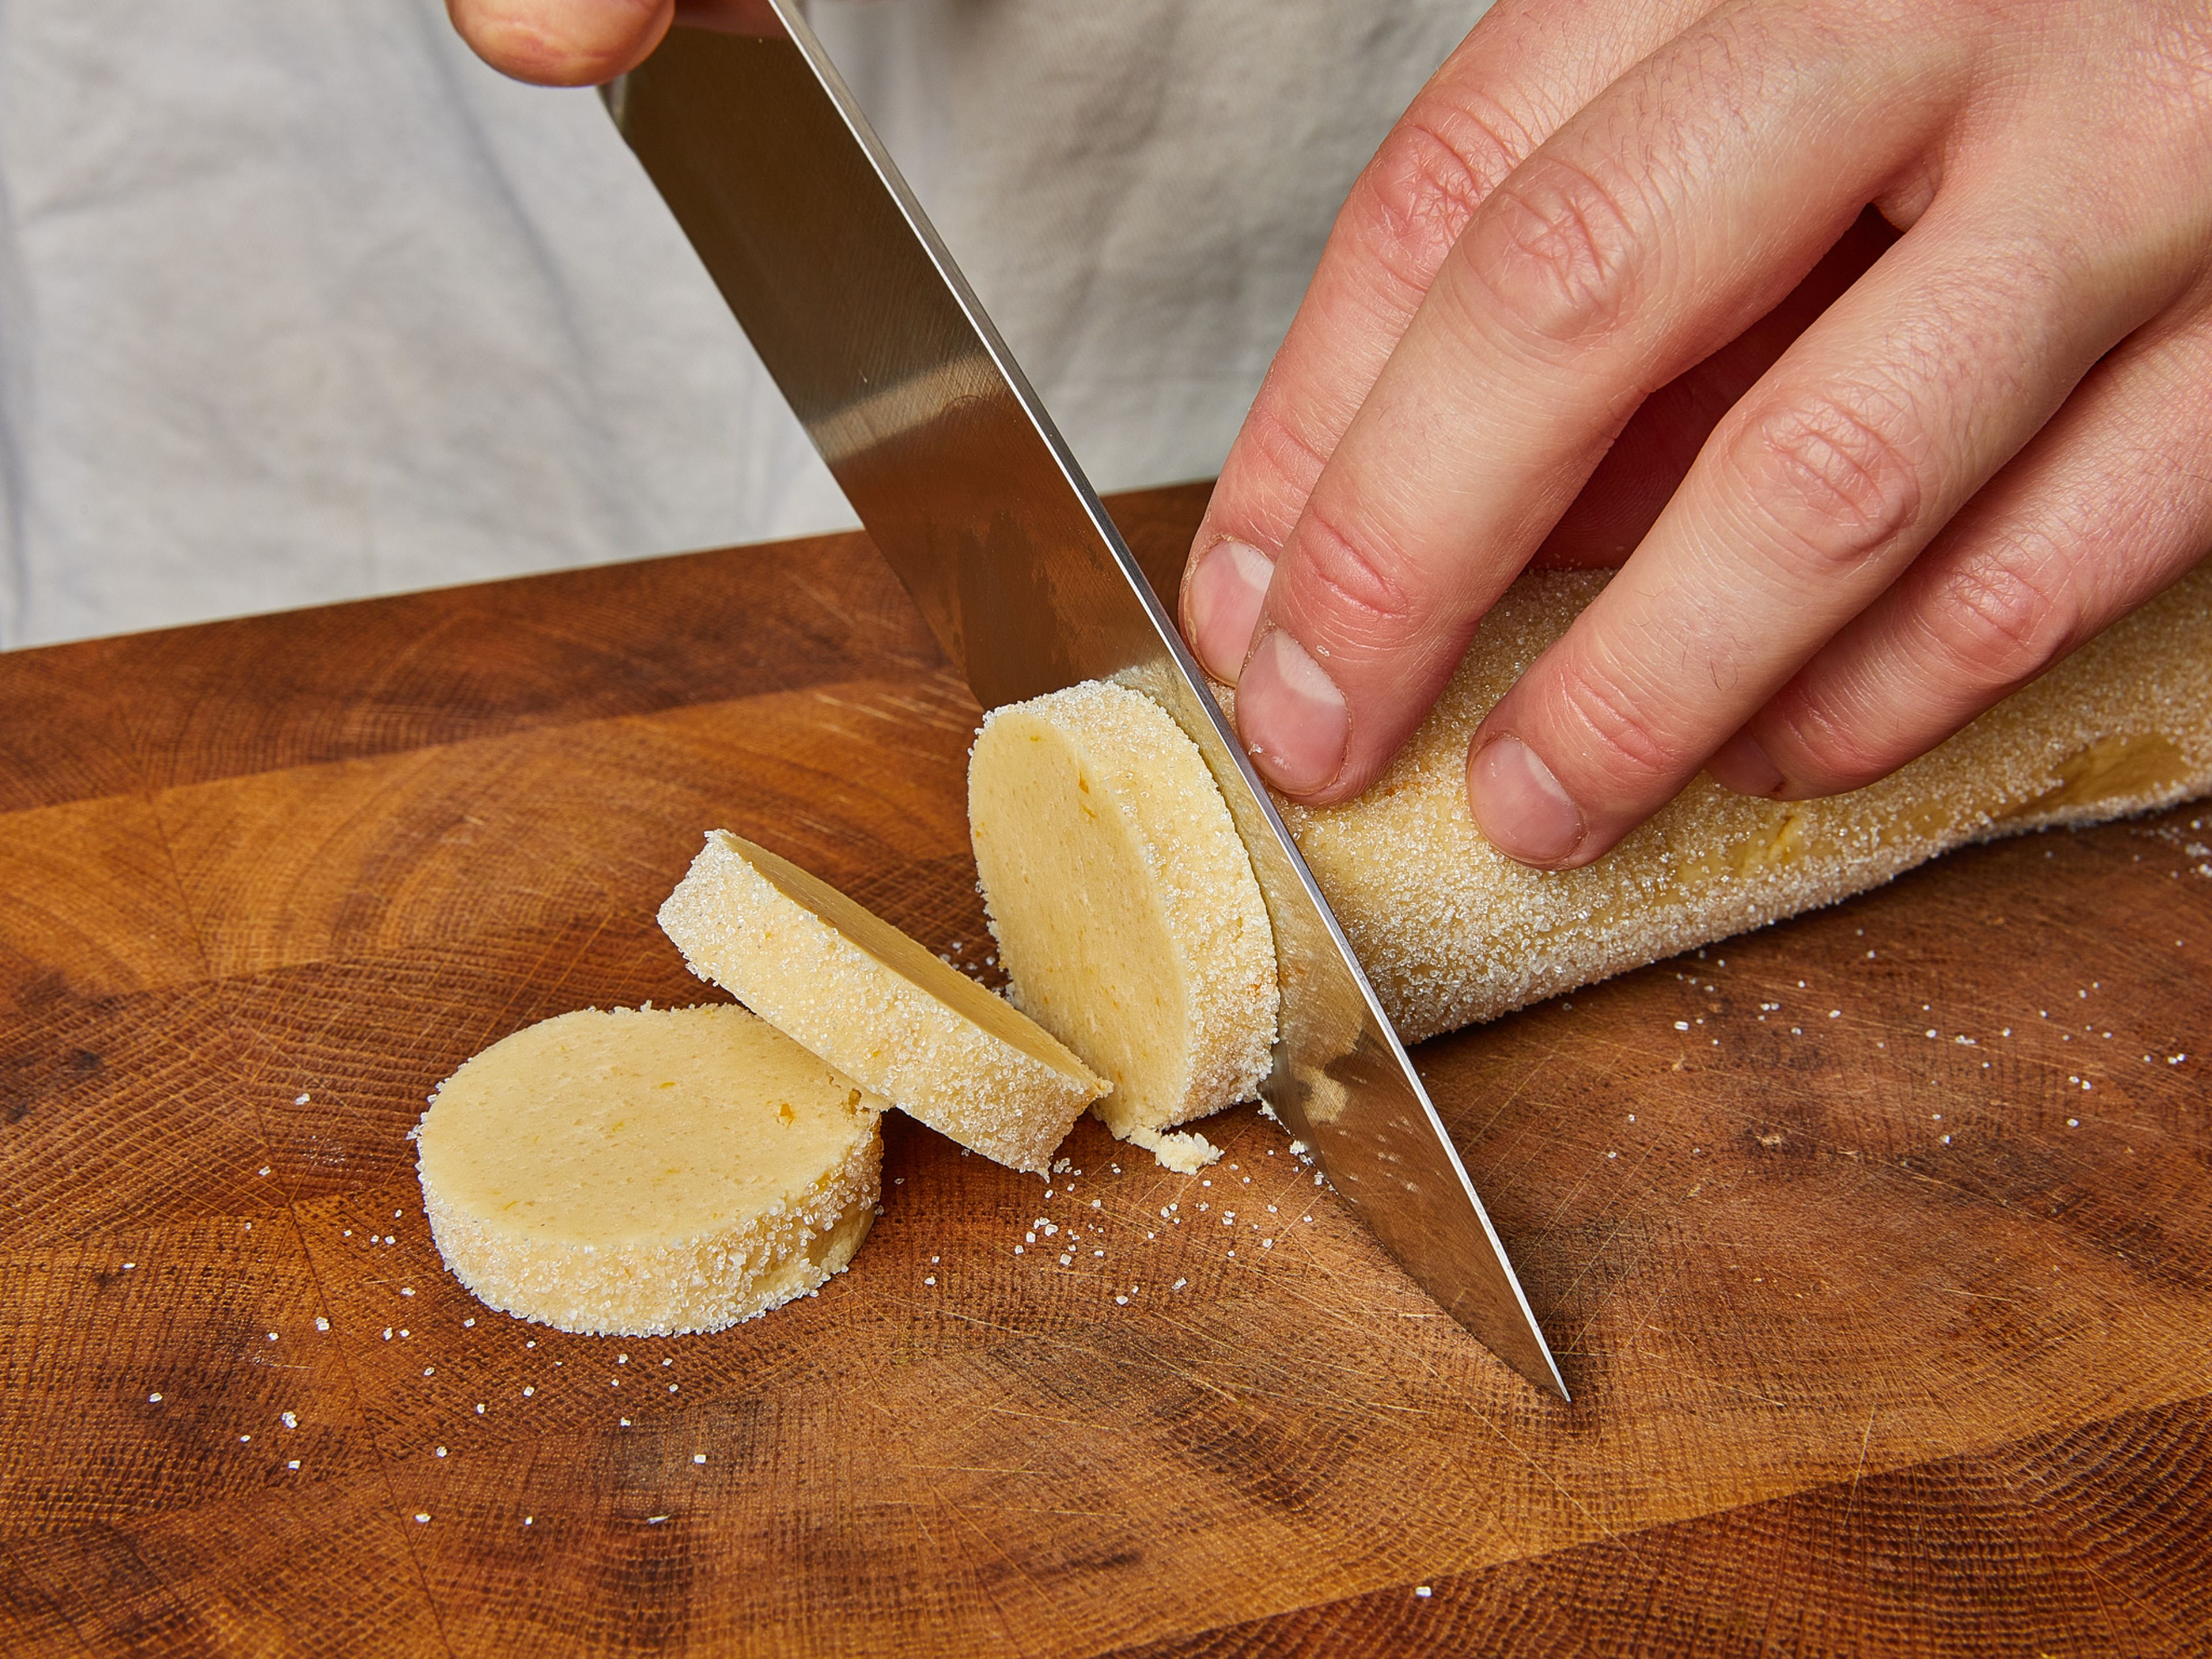 Using a sharp knife, cut the rolls into 1 cm/0.4 in. thick slices and place them on two baking sheets lined with parchment paper, approx. 2 cm/0.8 in. apart. Bake the still-frozen cookies until golden brown, for approx. 15–18 min. (the baking time is reduced to approx. 12–15 min. if the cookie dough is no longer frozen). Let cool on a wire rack. Top with melted chocolate if desired.